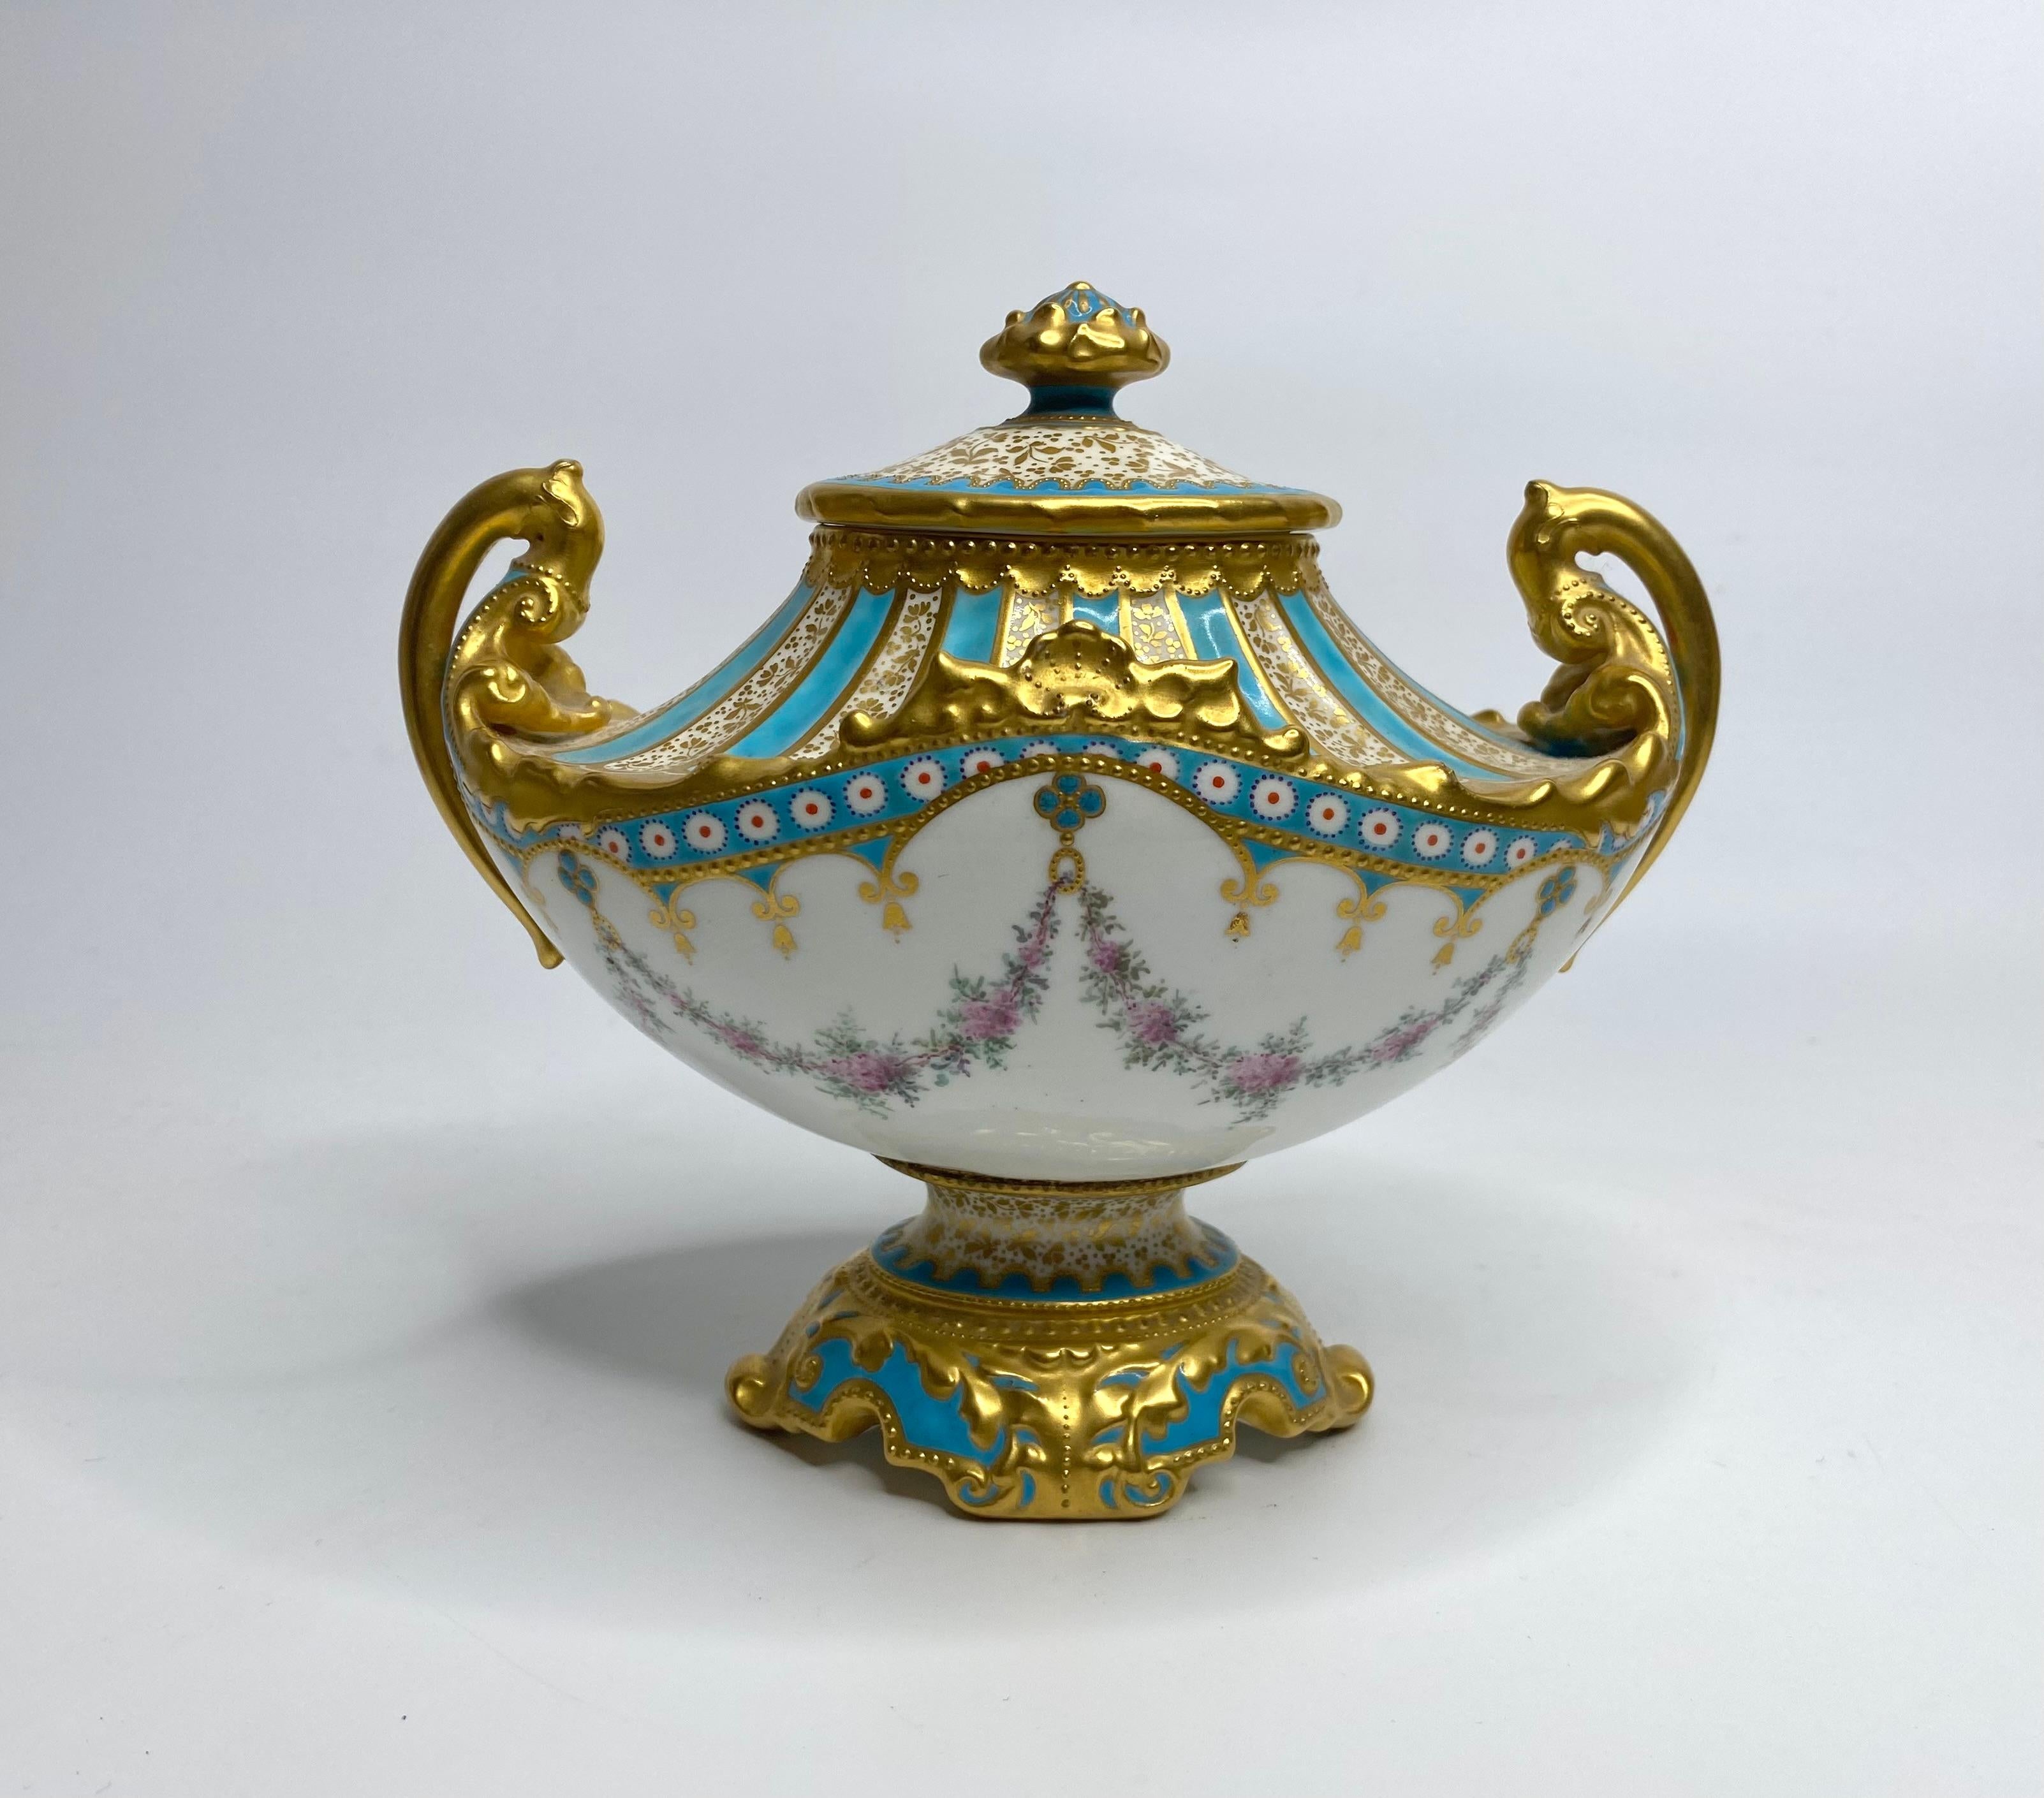 Royal Crown Derby porcelain vase and cover, painted by Desire Leroy, dated 1897. The Sevres style twin handled vase, hand painted with swags of flowers, suspended from a vase containing flowers, divided by panels of blue flowers. 
The shoulder of